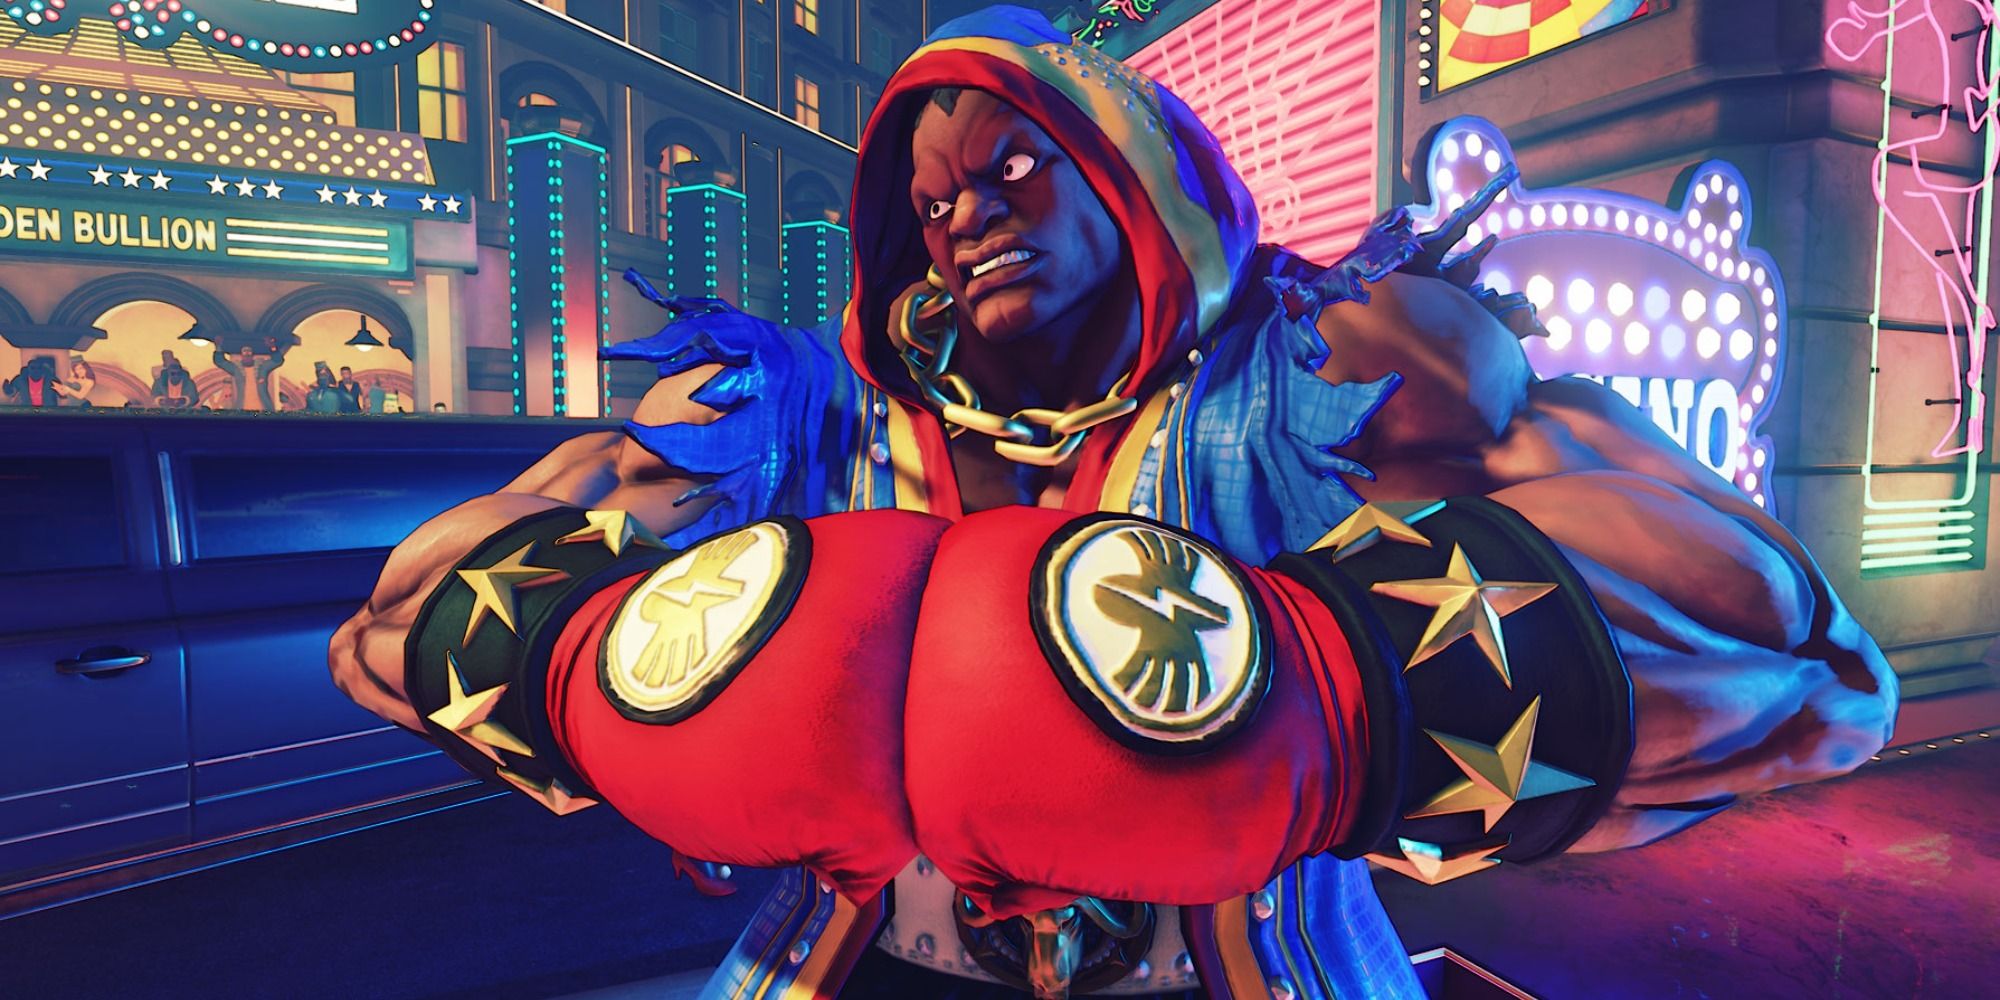 Balrog from Street Fighter V - A man in a hooded boxing robe with red boxing gloves.